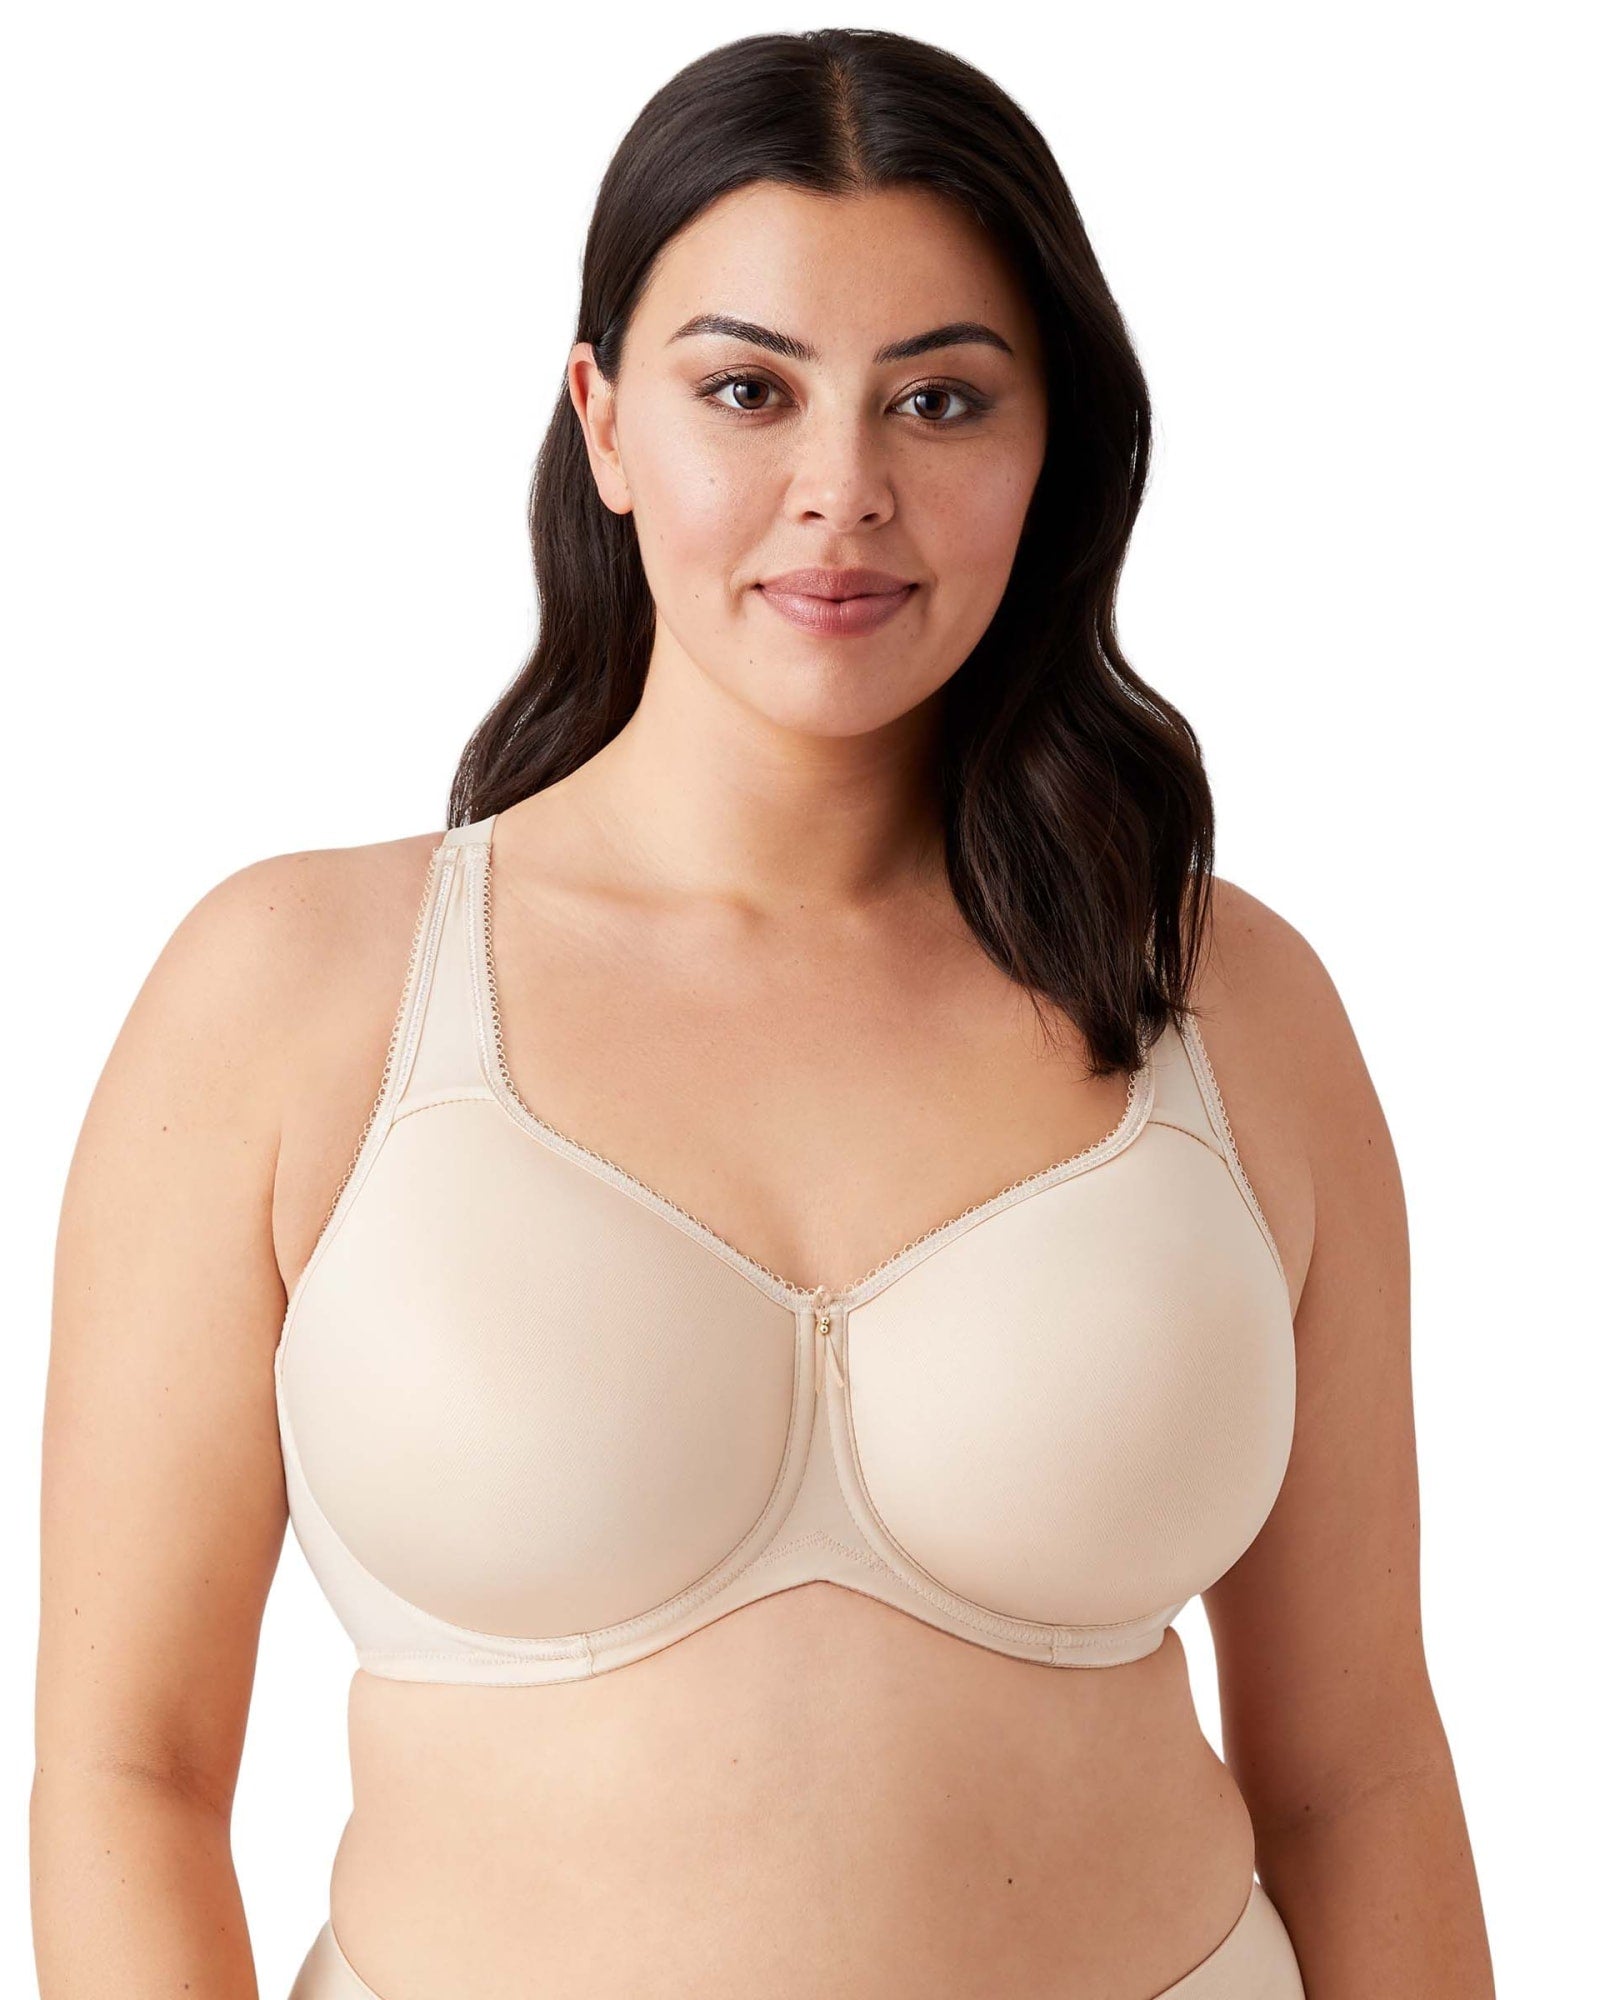 Stylish and Comfortable Bra Set by Bramour